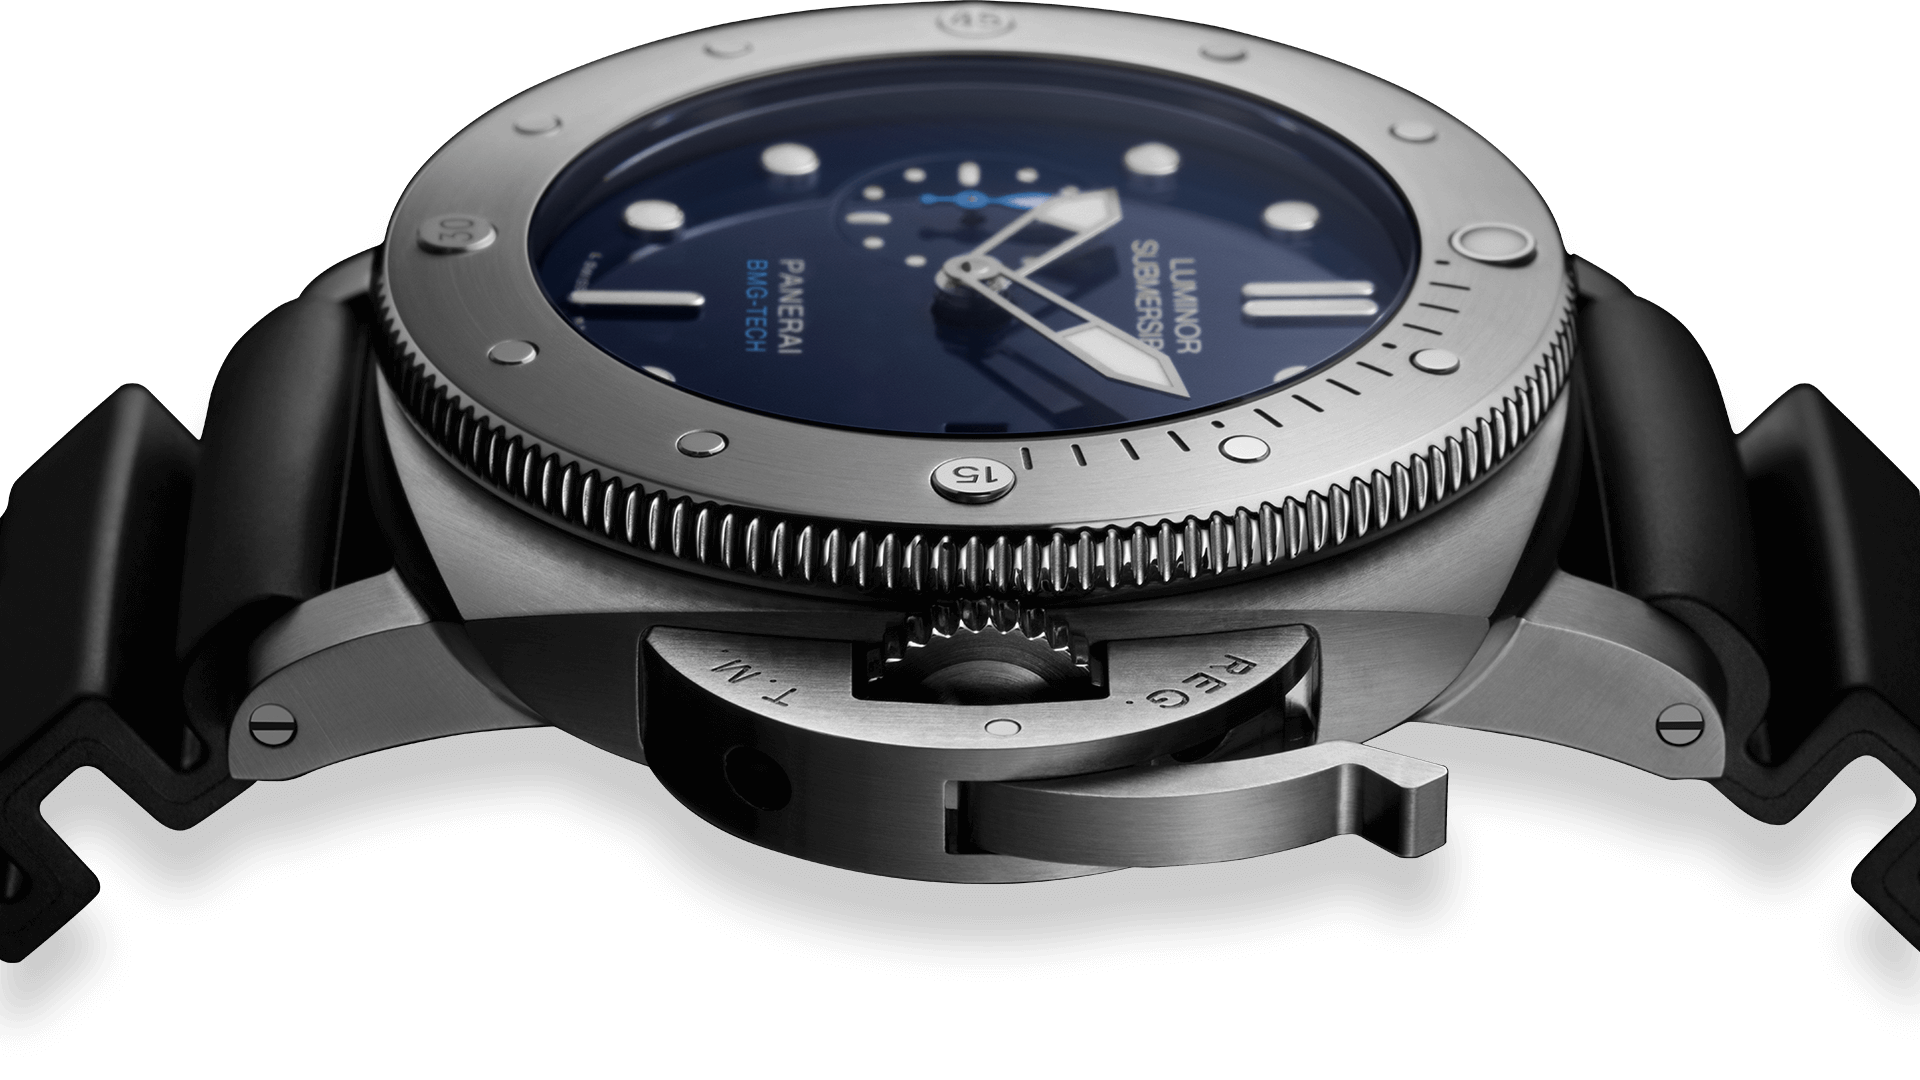 Panerai Luminor Submersible 1950 BMG-Tech 3 Days Automatic Replica Watches With Arabic Numerals